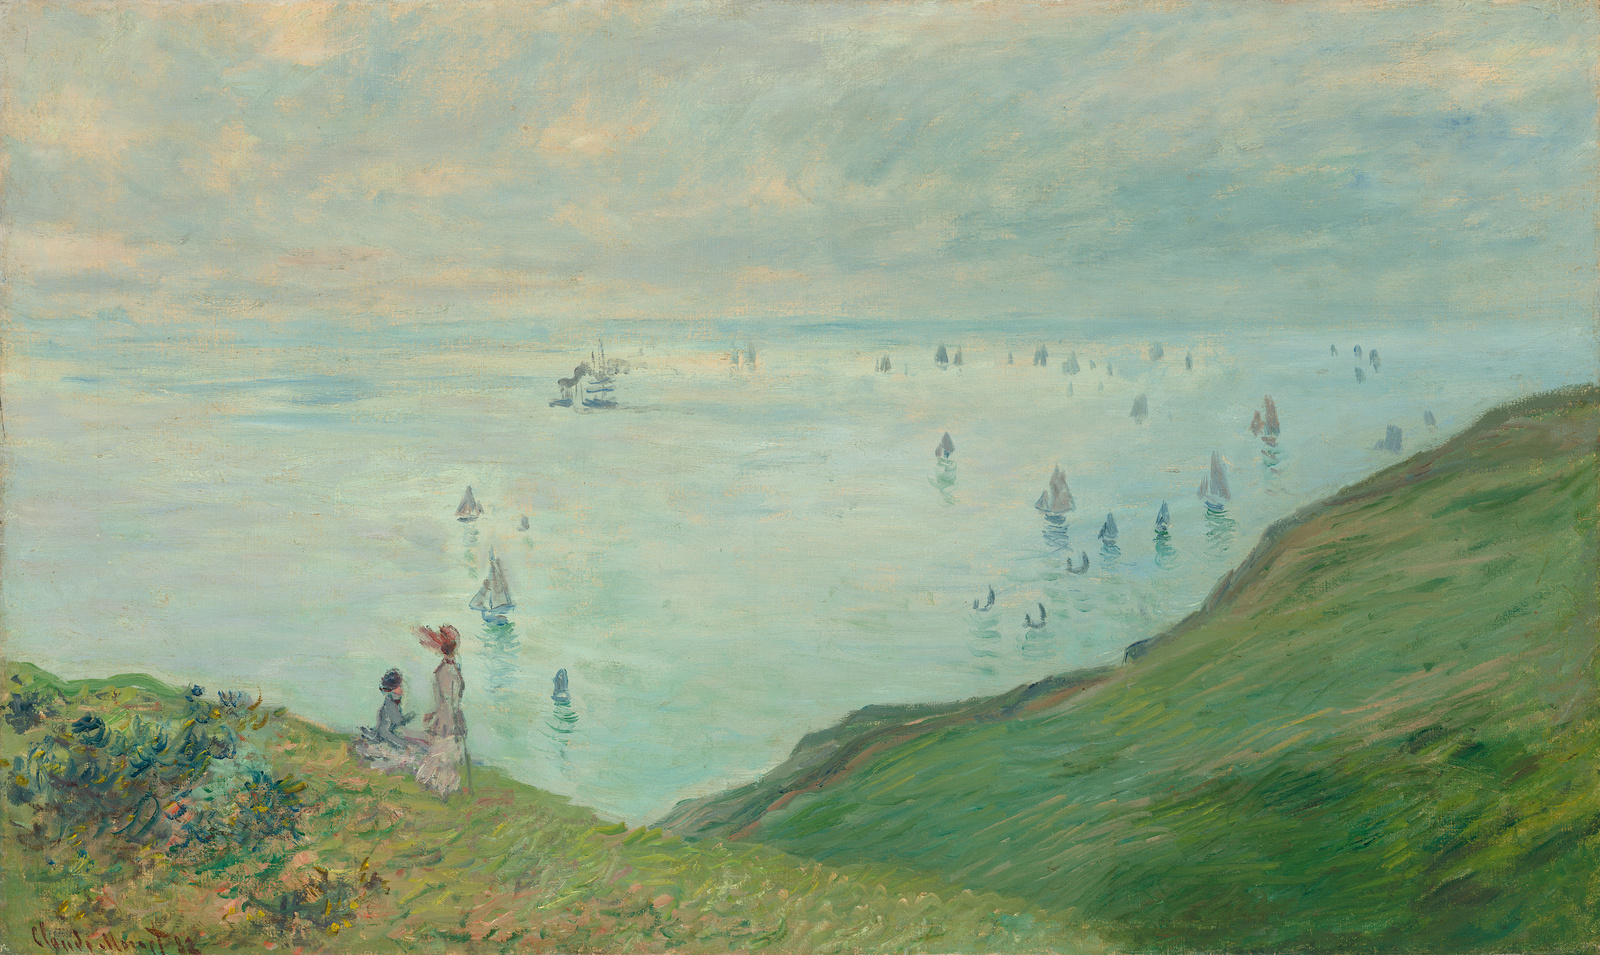 Cliffs at Pourville by Claude Monet, 1882. Courtesy of National Gallery of Art, Washington.